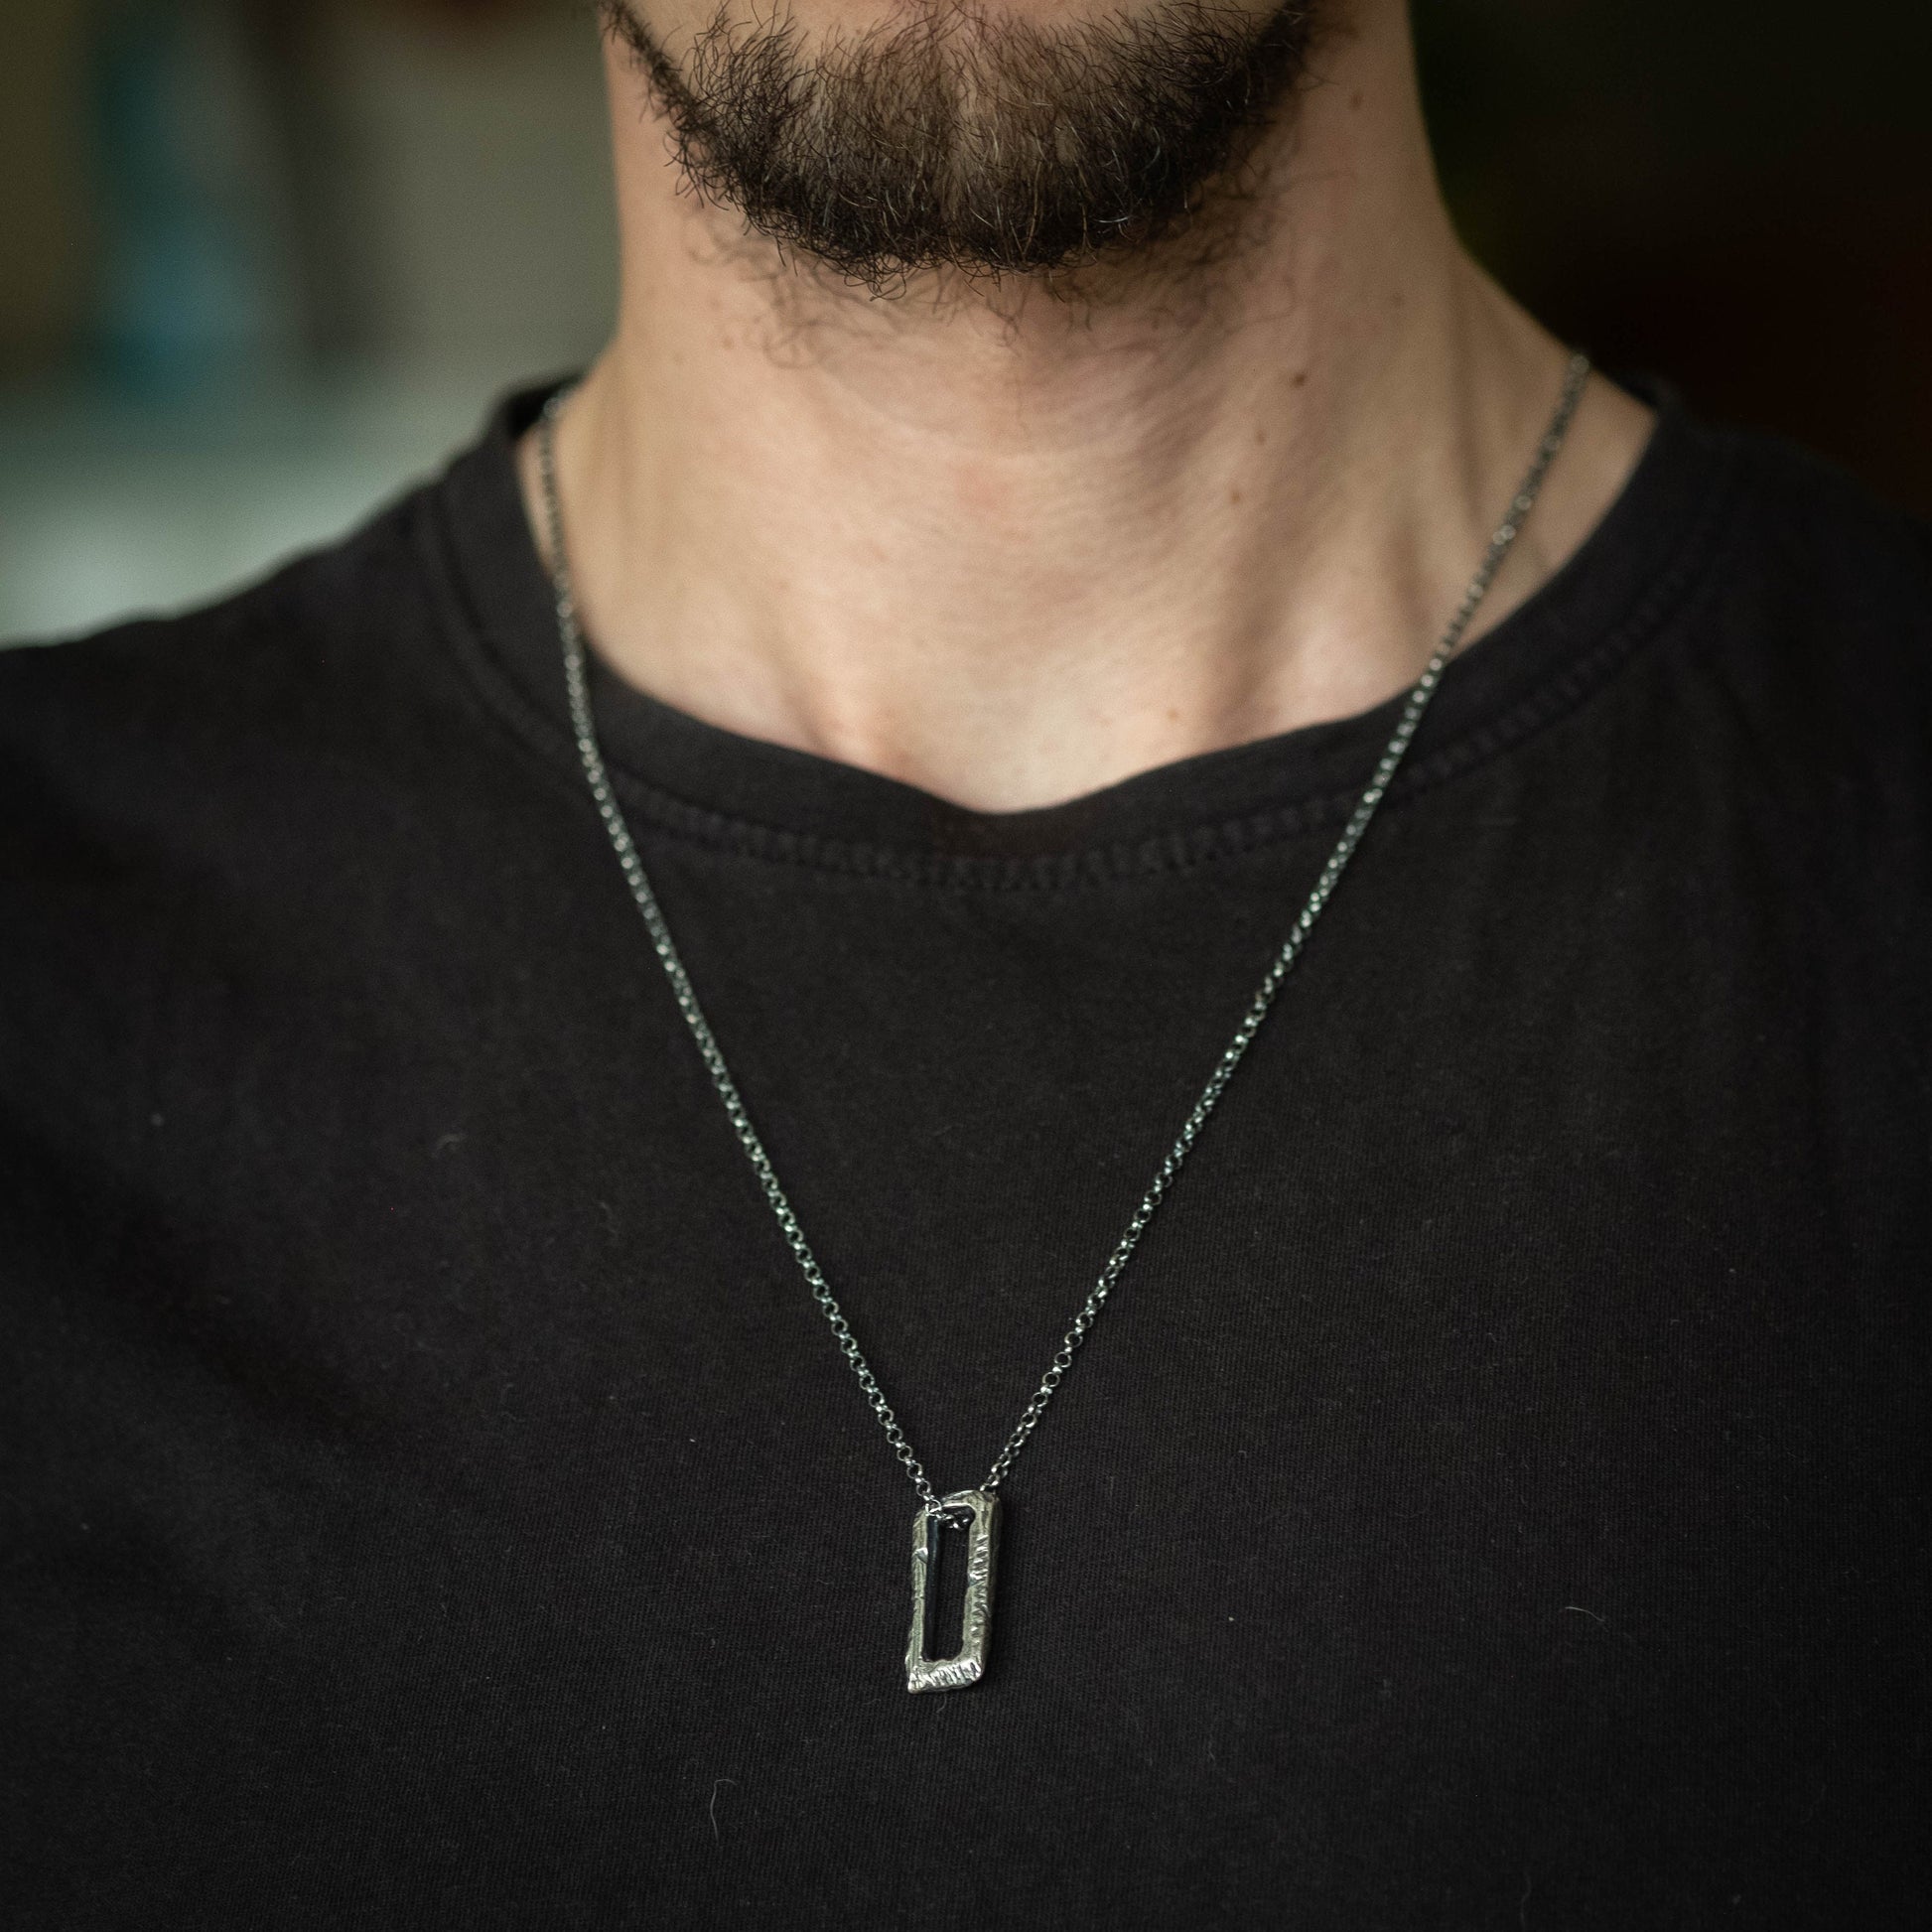 Unique mens Silver Necklace, Handmade Jewelry, Viking jewelry,  Gift for him, Mens gift, Boyfriend gift, Husbant gift, Gift for him